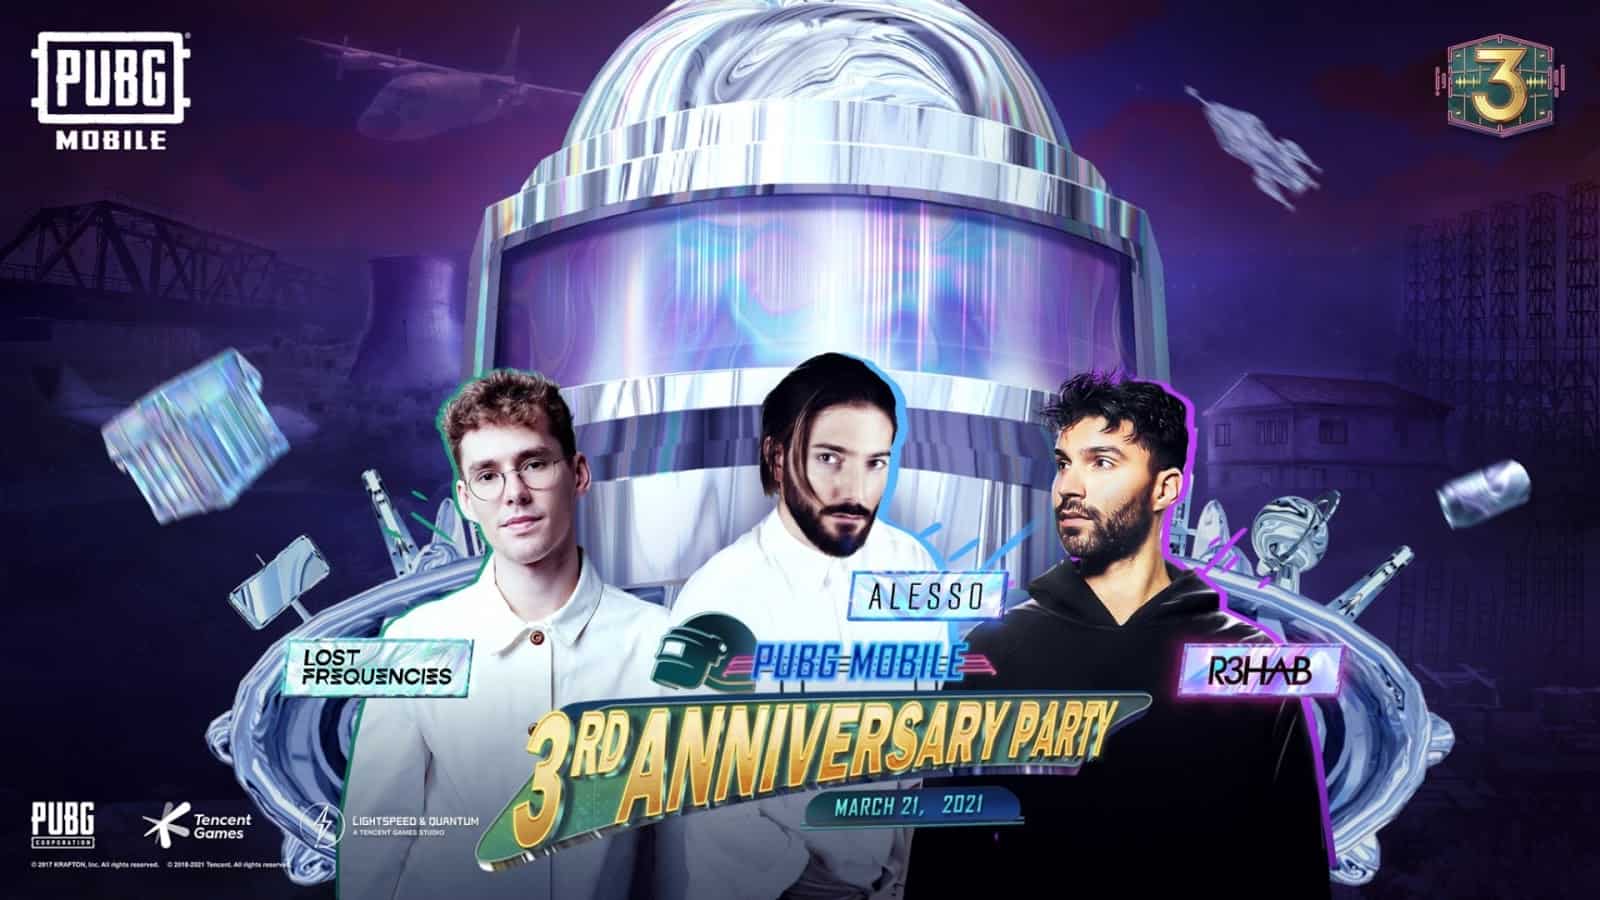 PUBG Mobile: All Guests Who Will Perform At 3rd Anniversary Party